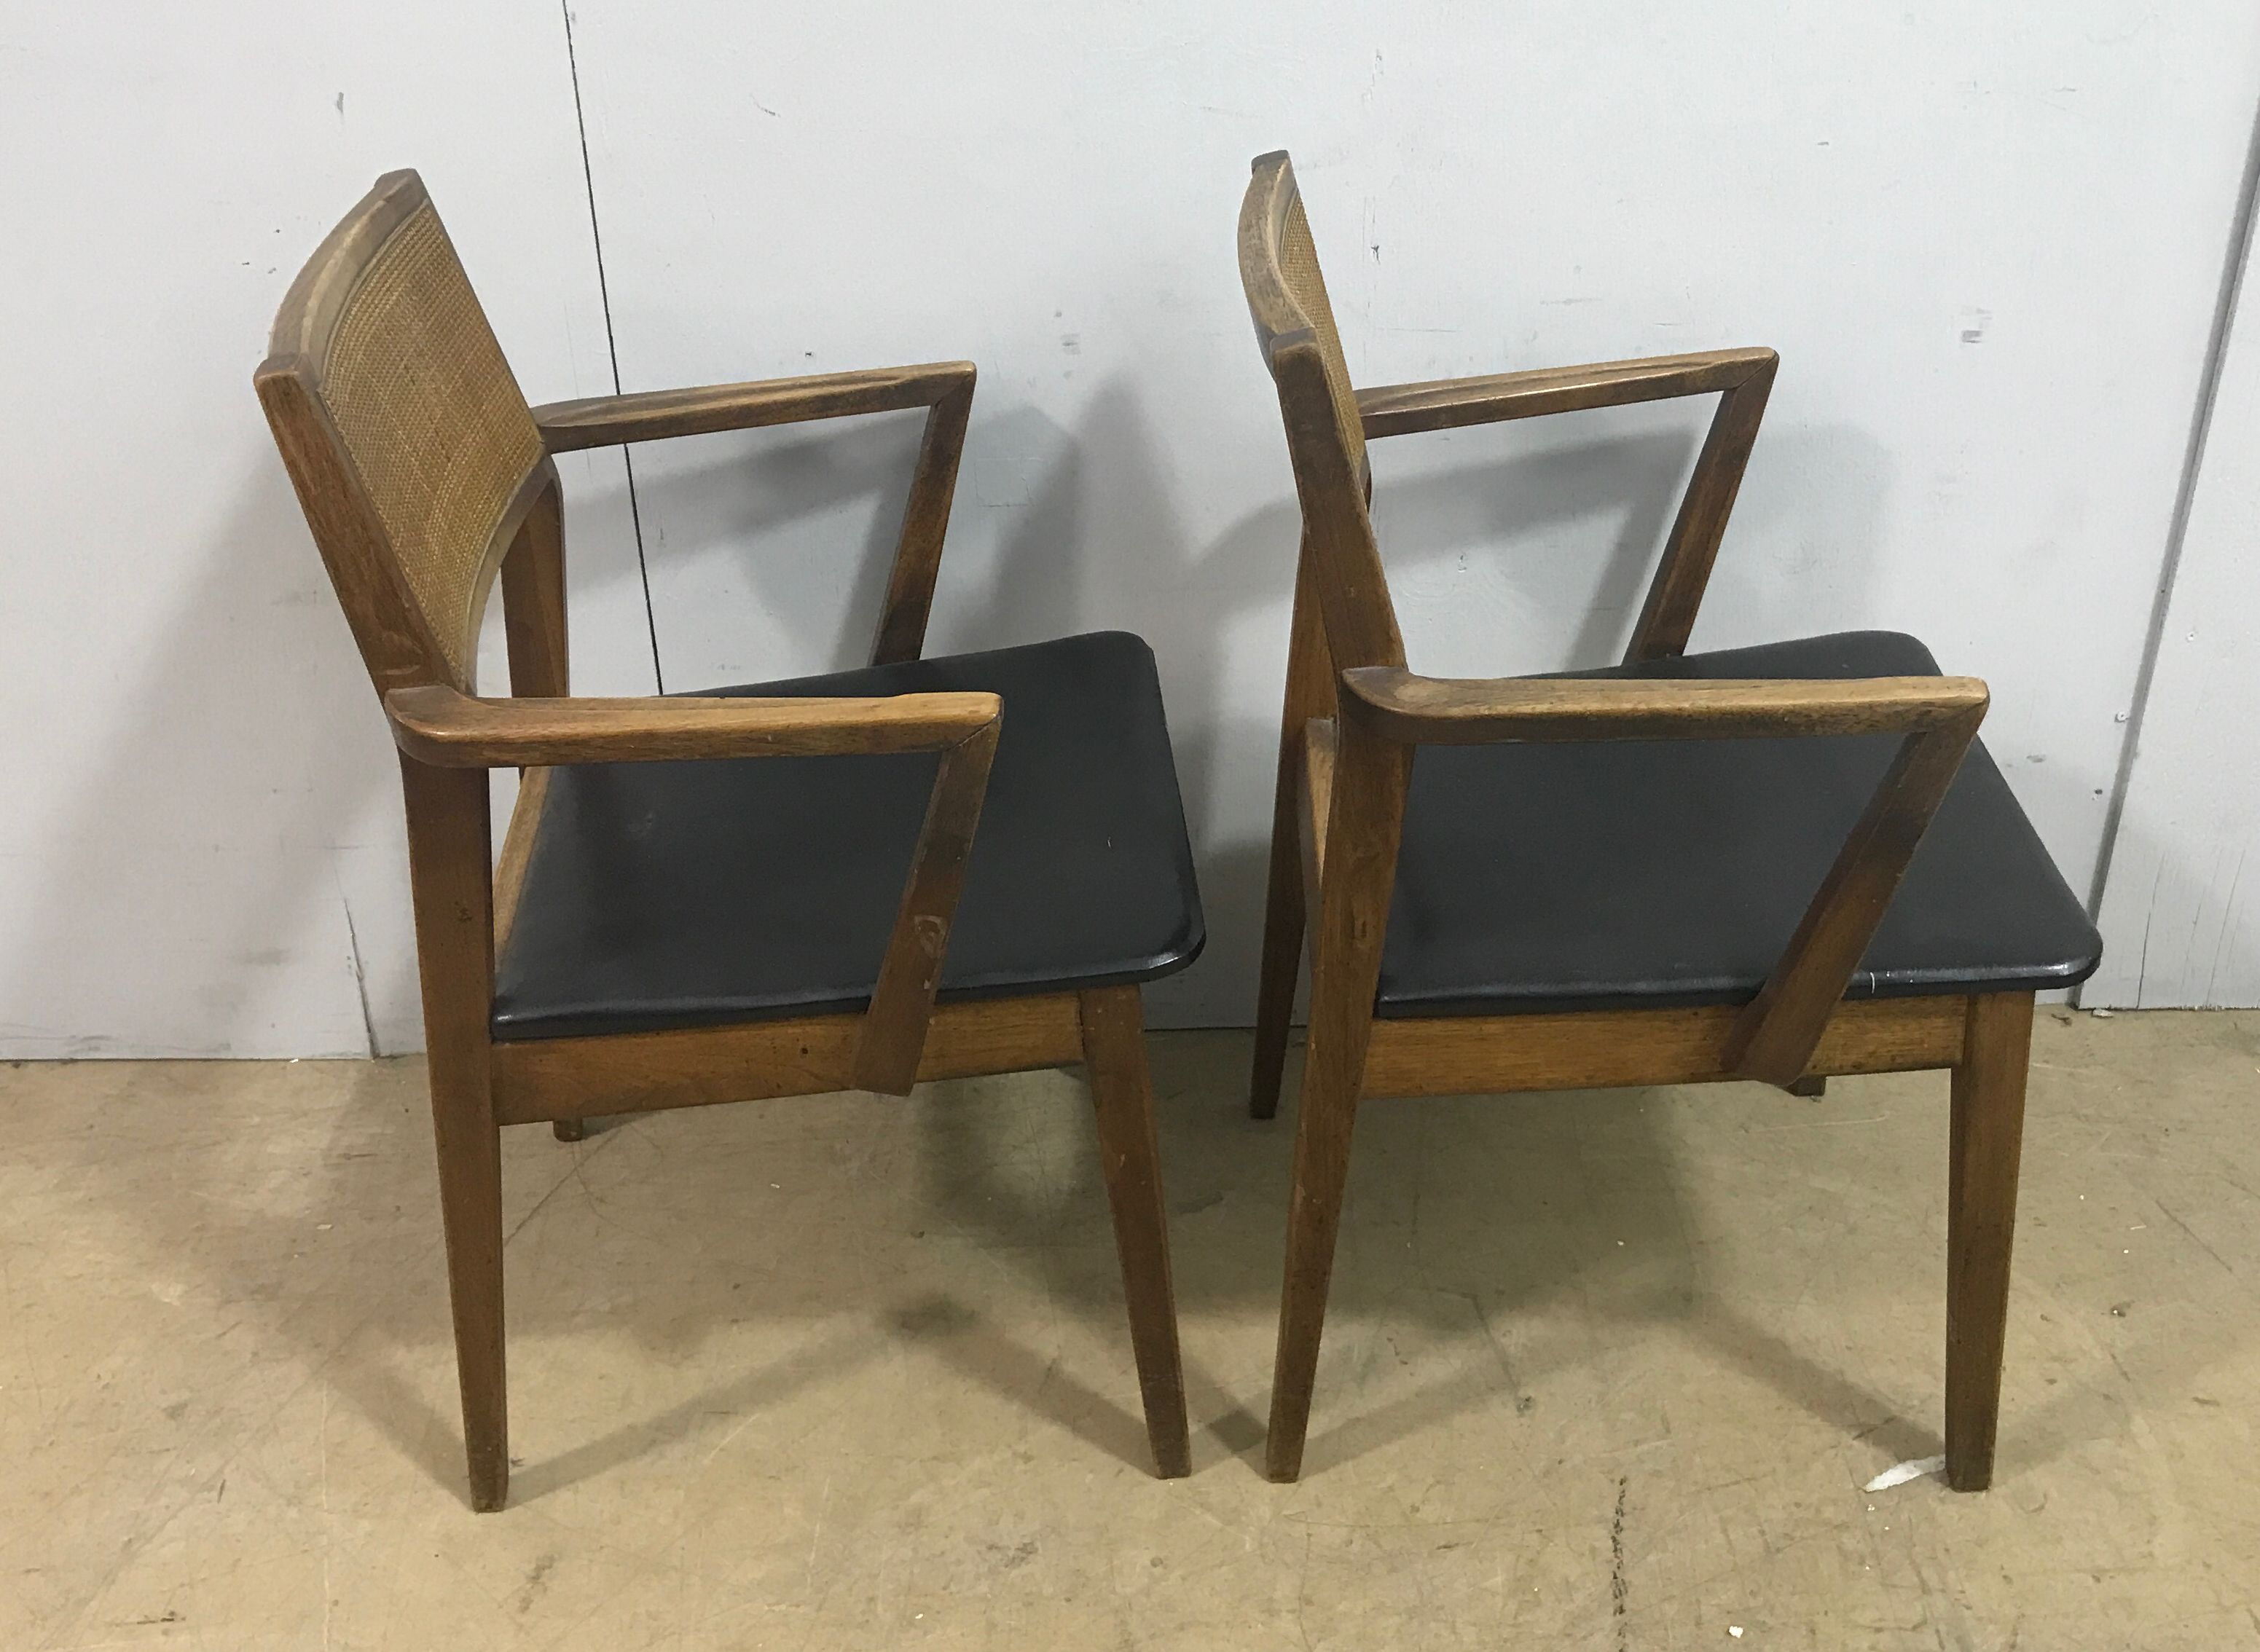 2 Mid Century Modern Wooden Dining Chairs - Black Cushions - Home Furniture